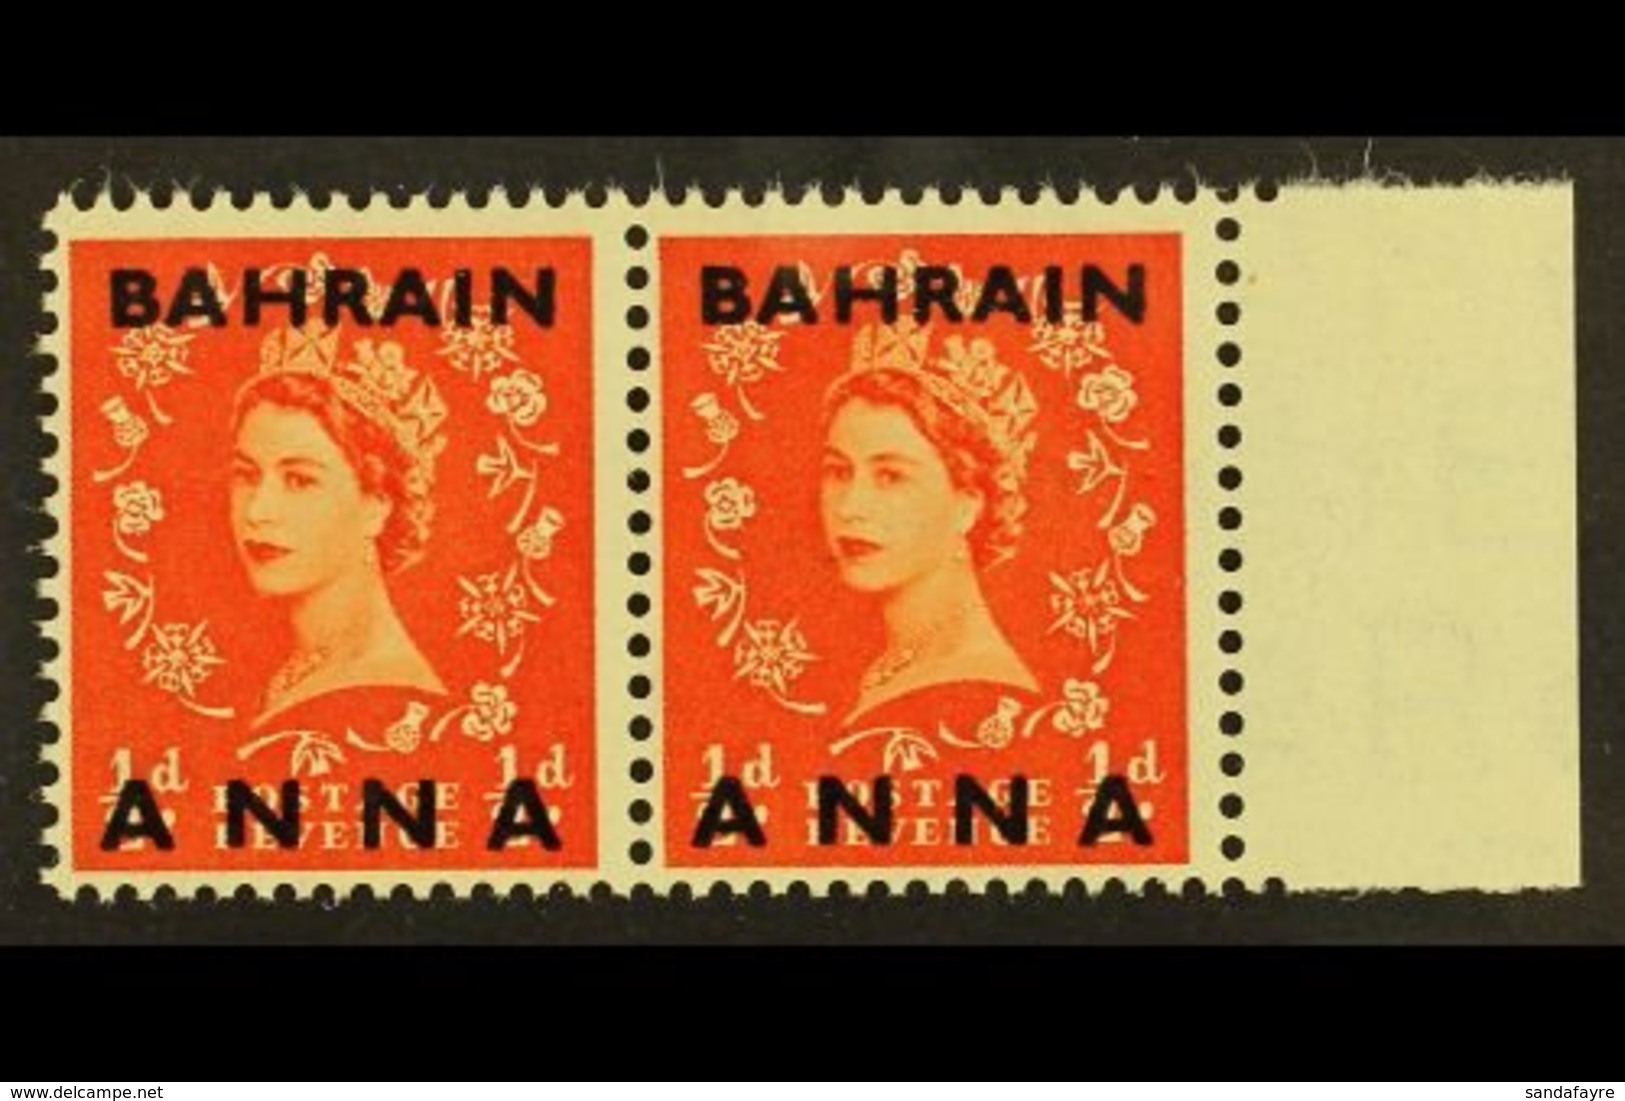 1952-54 DRAMATIC VARIETY ½a On ½d Orange-red, Both Stamps Bearing The Elusive "Fraction Omitted" Variety, SG 80a, An Att - Bahrein (...-1965)